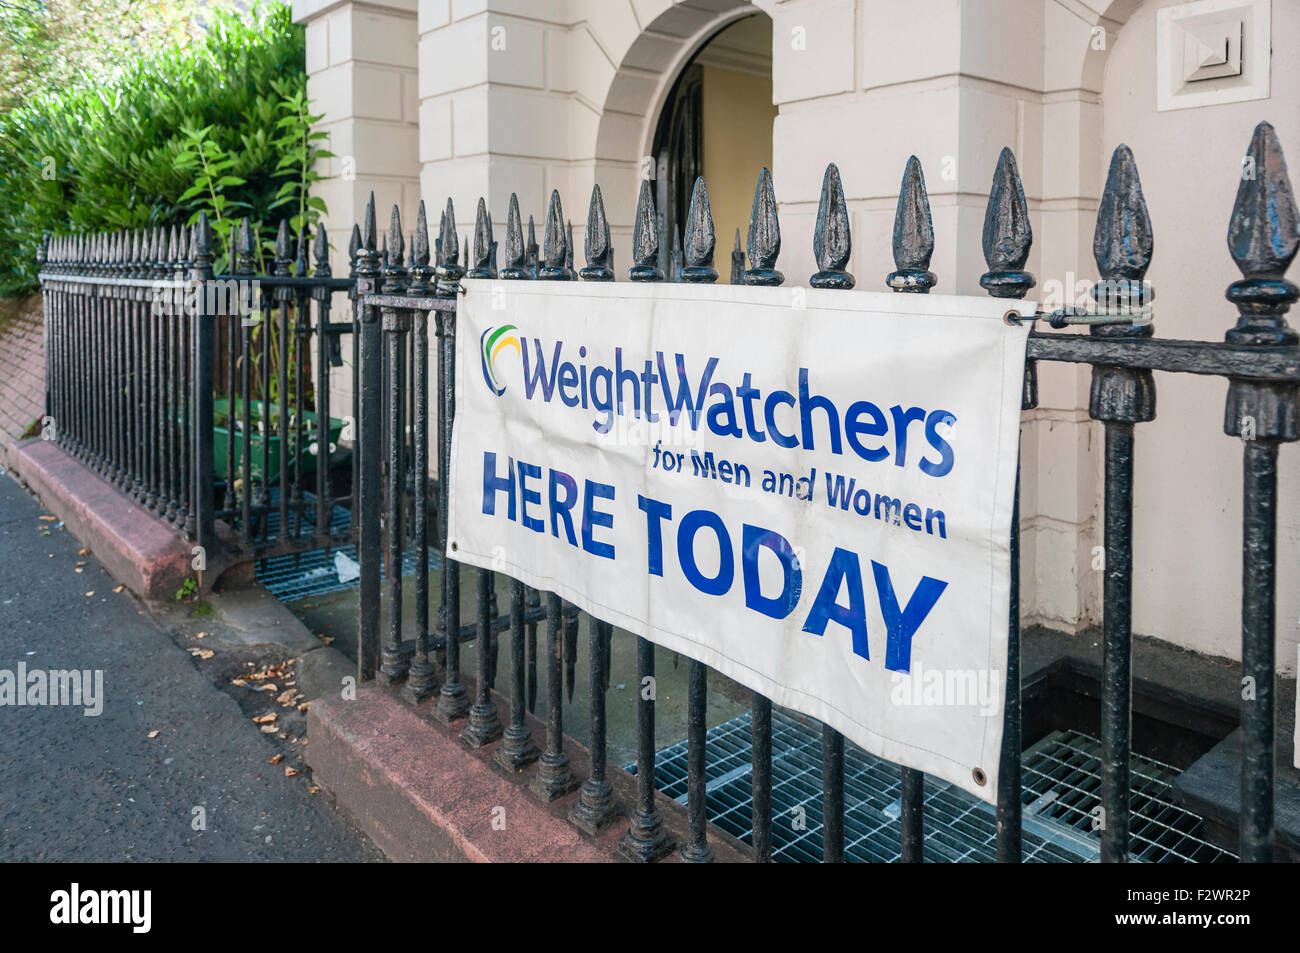 A sign informing the public that a WeightWatchers meeting is taking place in a venue today Stock Photo